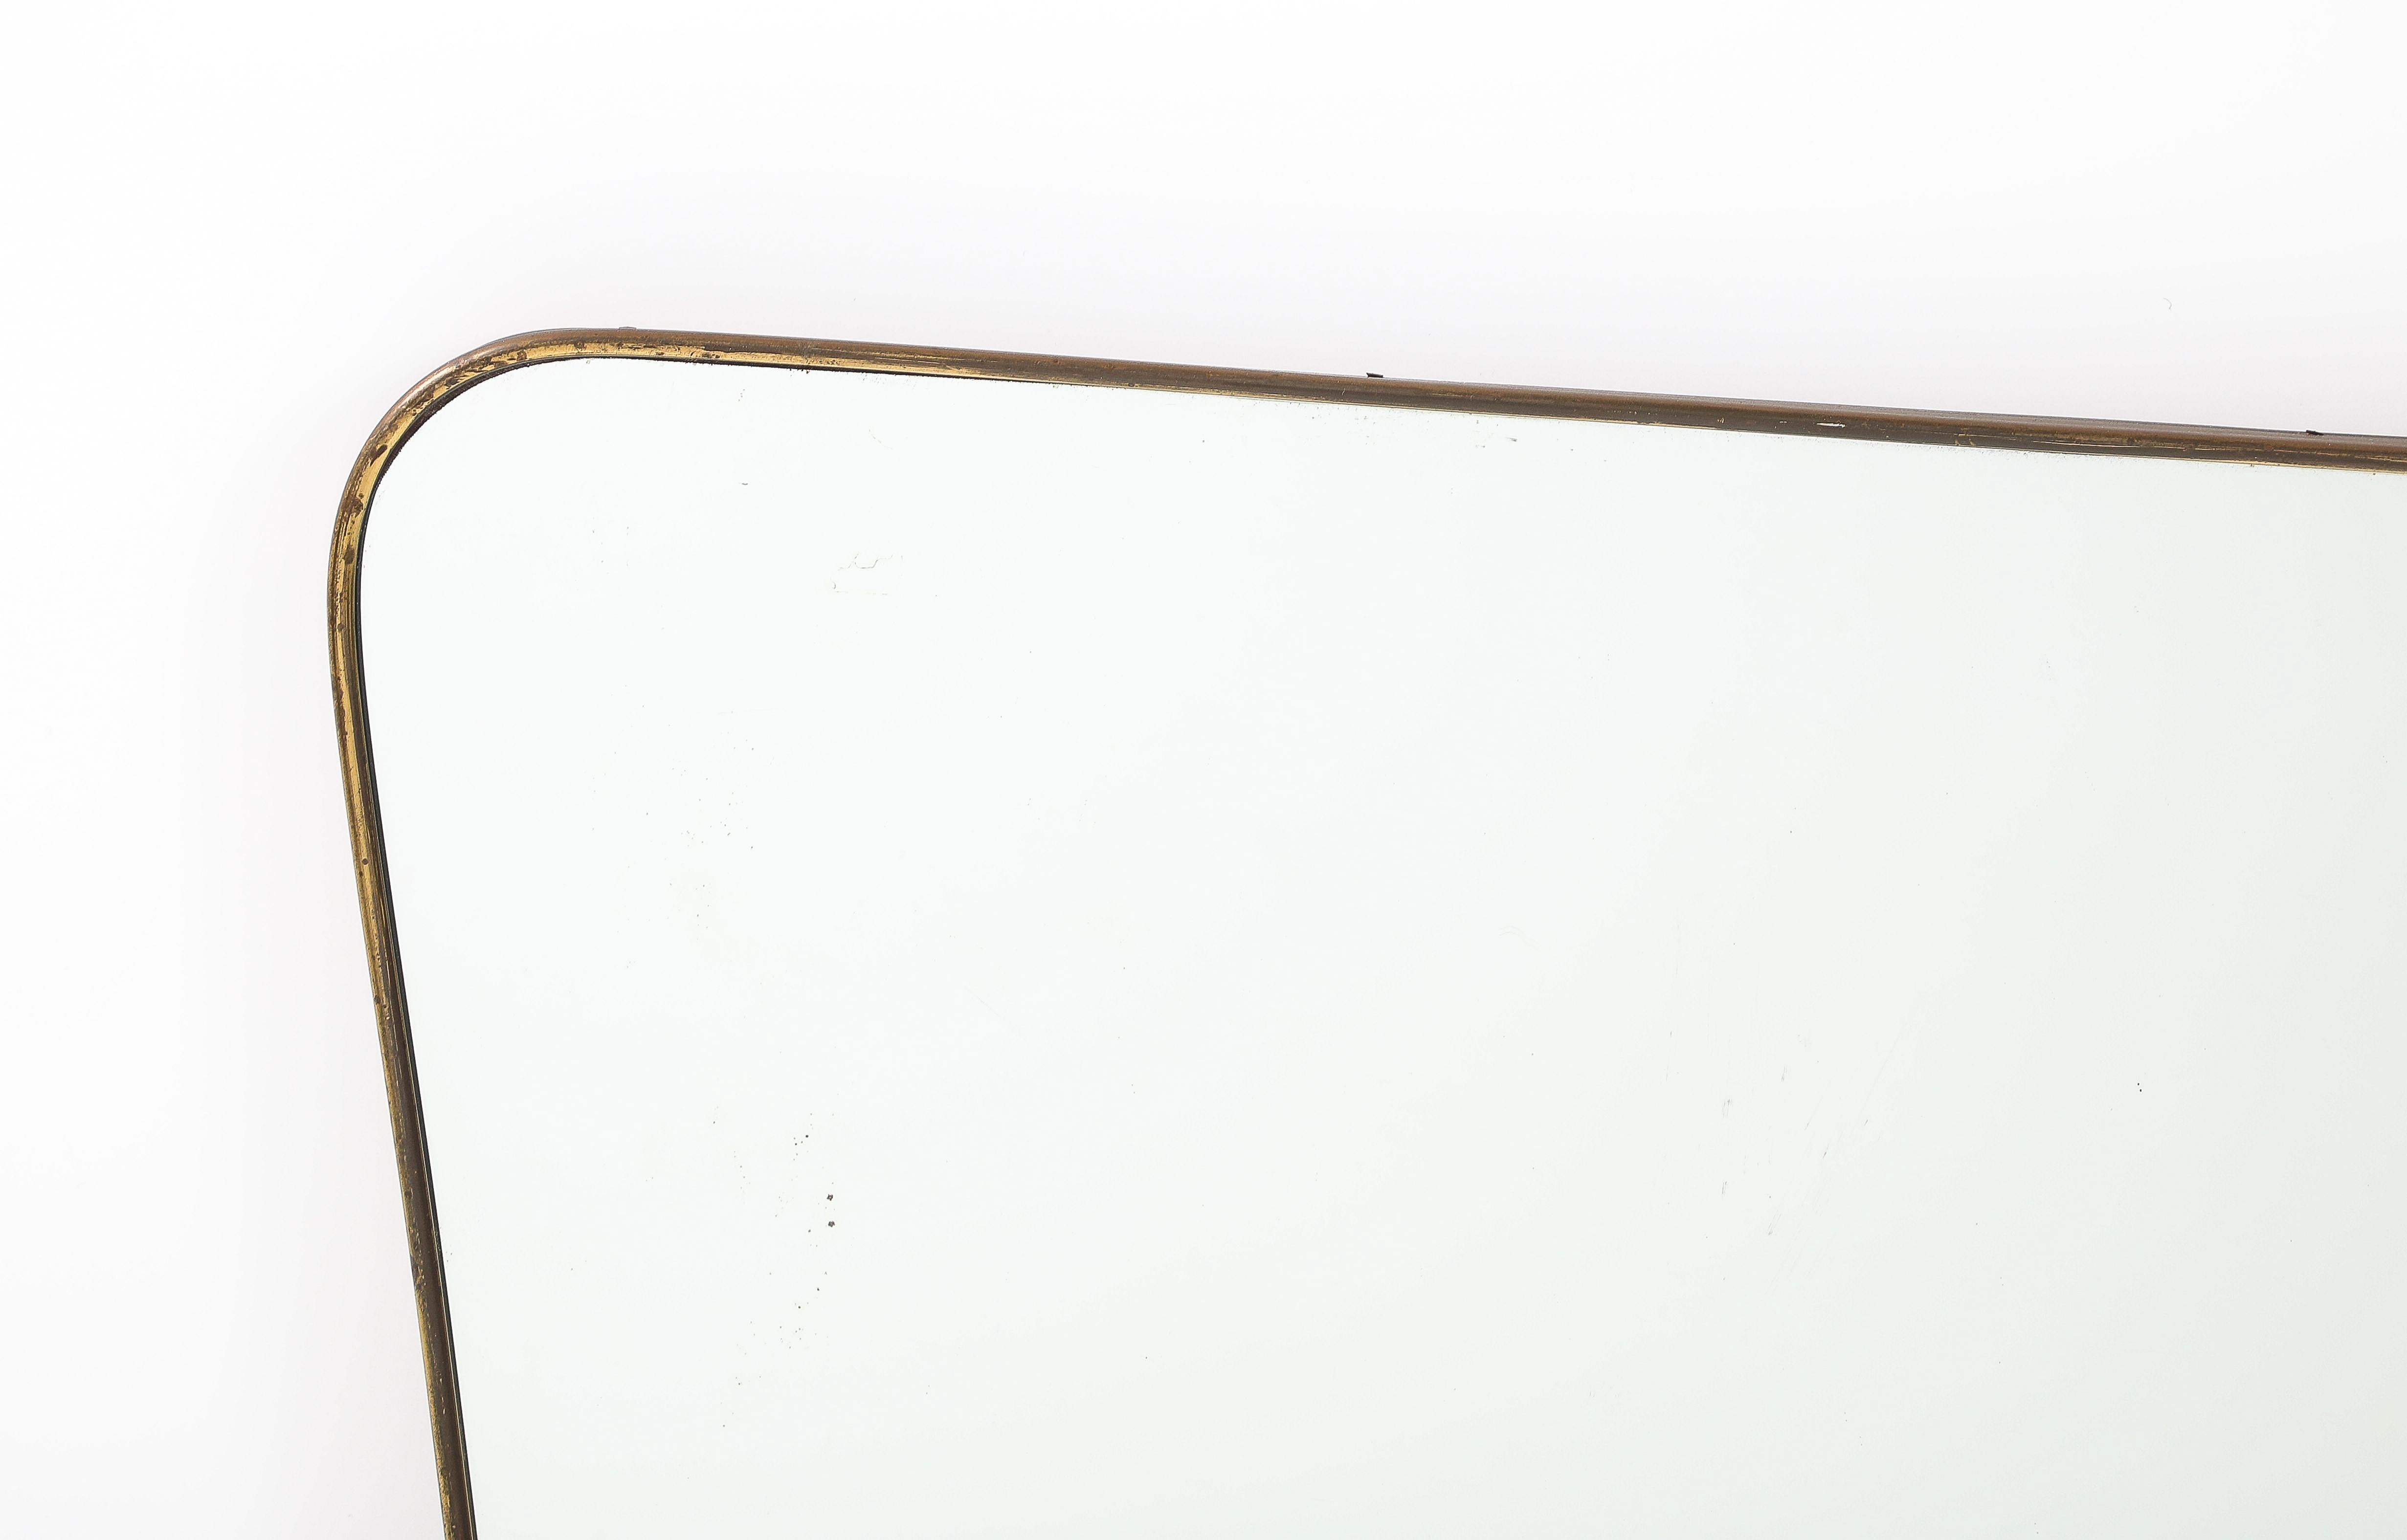 1950s Italian modernist horizontal overmantal brass mirror in the style of Gio Ponti.  This exquisite mirror has a gently curved brass frame with rounded corners and gently tapering sides, The is a central top decorative brass scroll element, and a